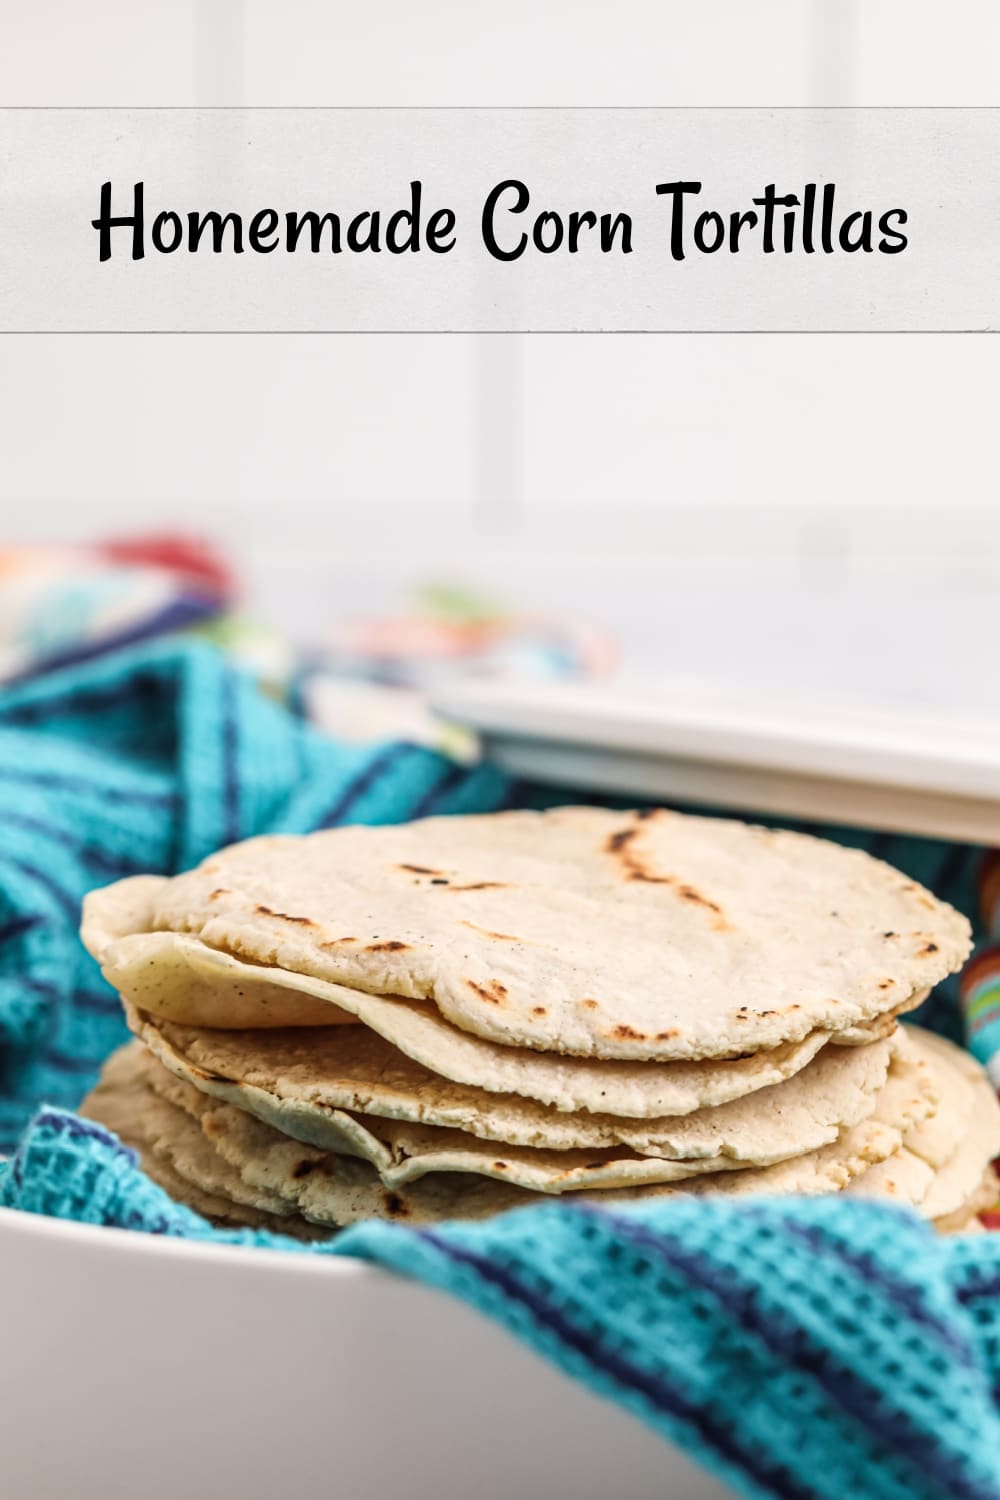 Once you make homemade corn tortillas, you will never buy them again. Corn tortilla making from scratch is a simple two-ingredient process. via @cmpollak1